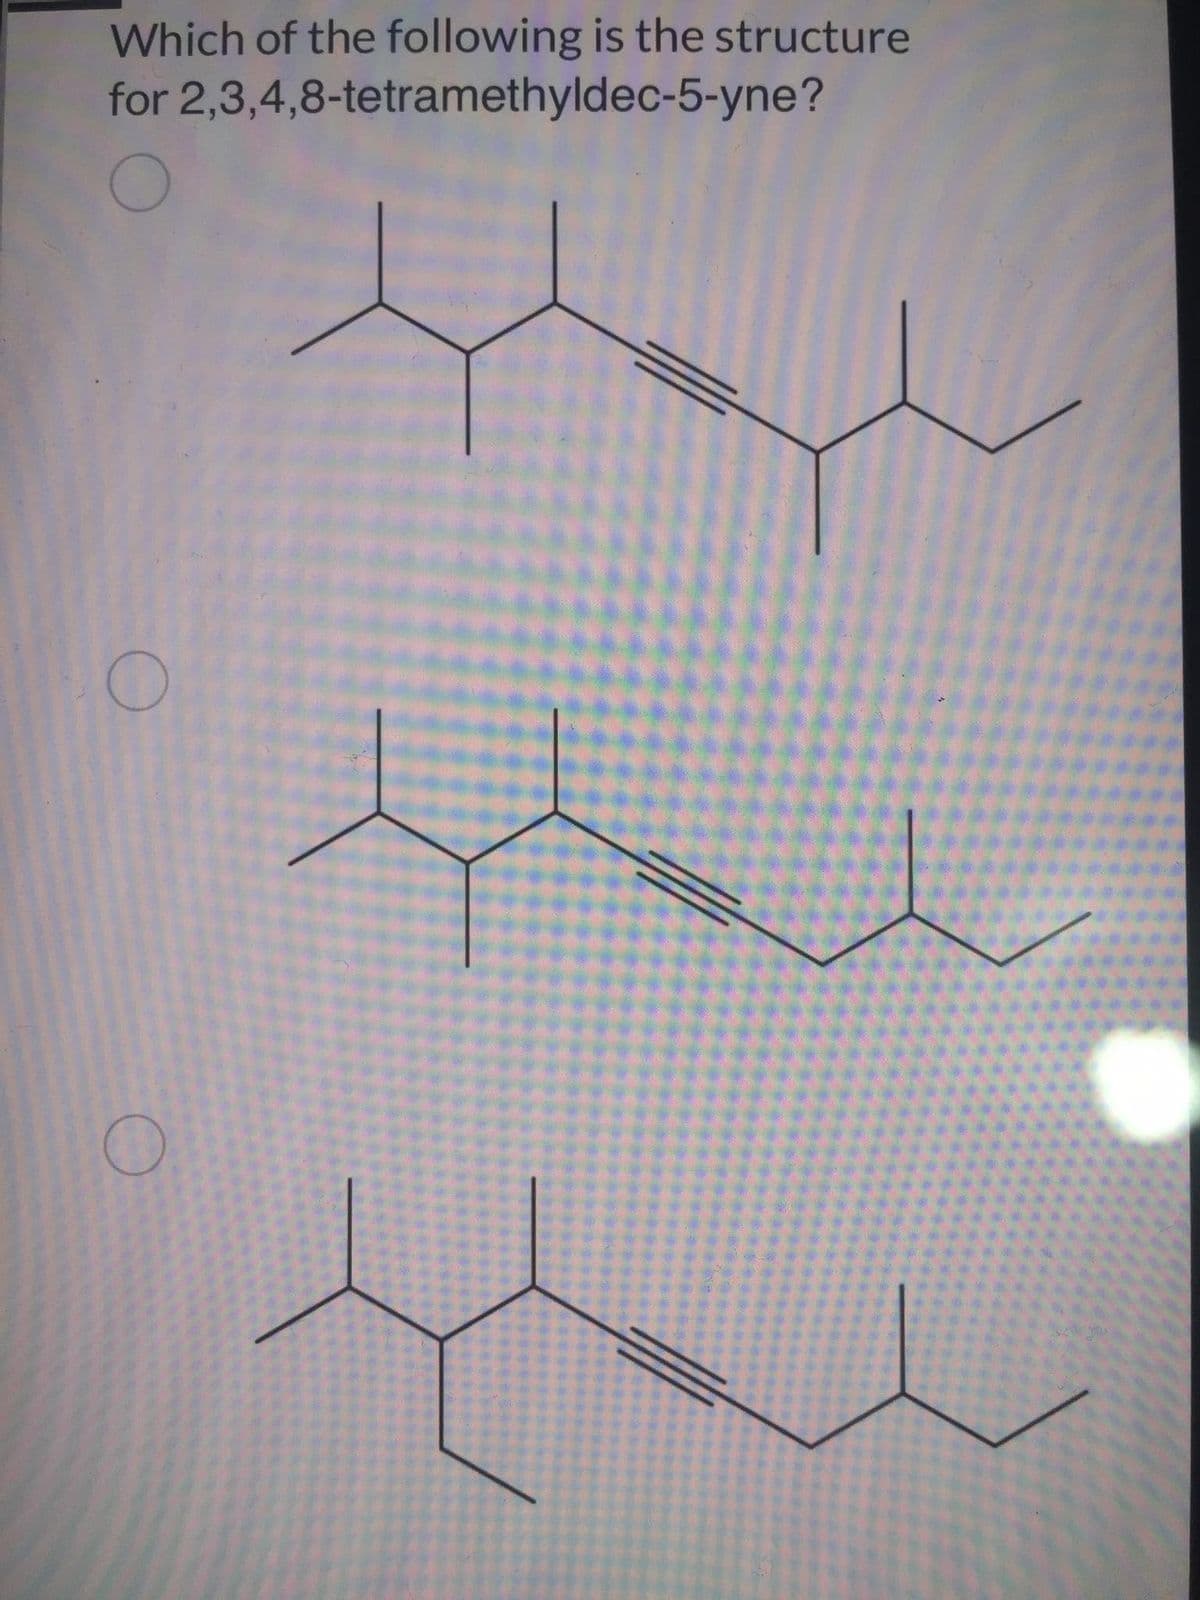 Which of the following is the structure
for 2,3,4,8-tetramethyldec-5-yne?
O
O
the